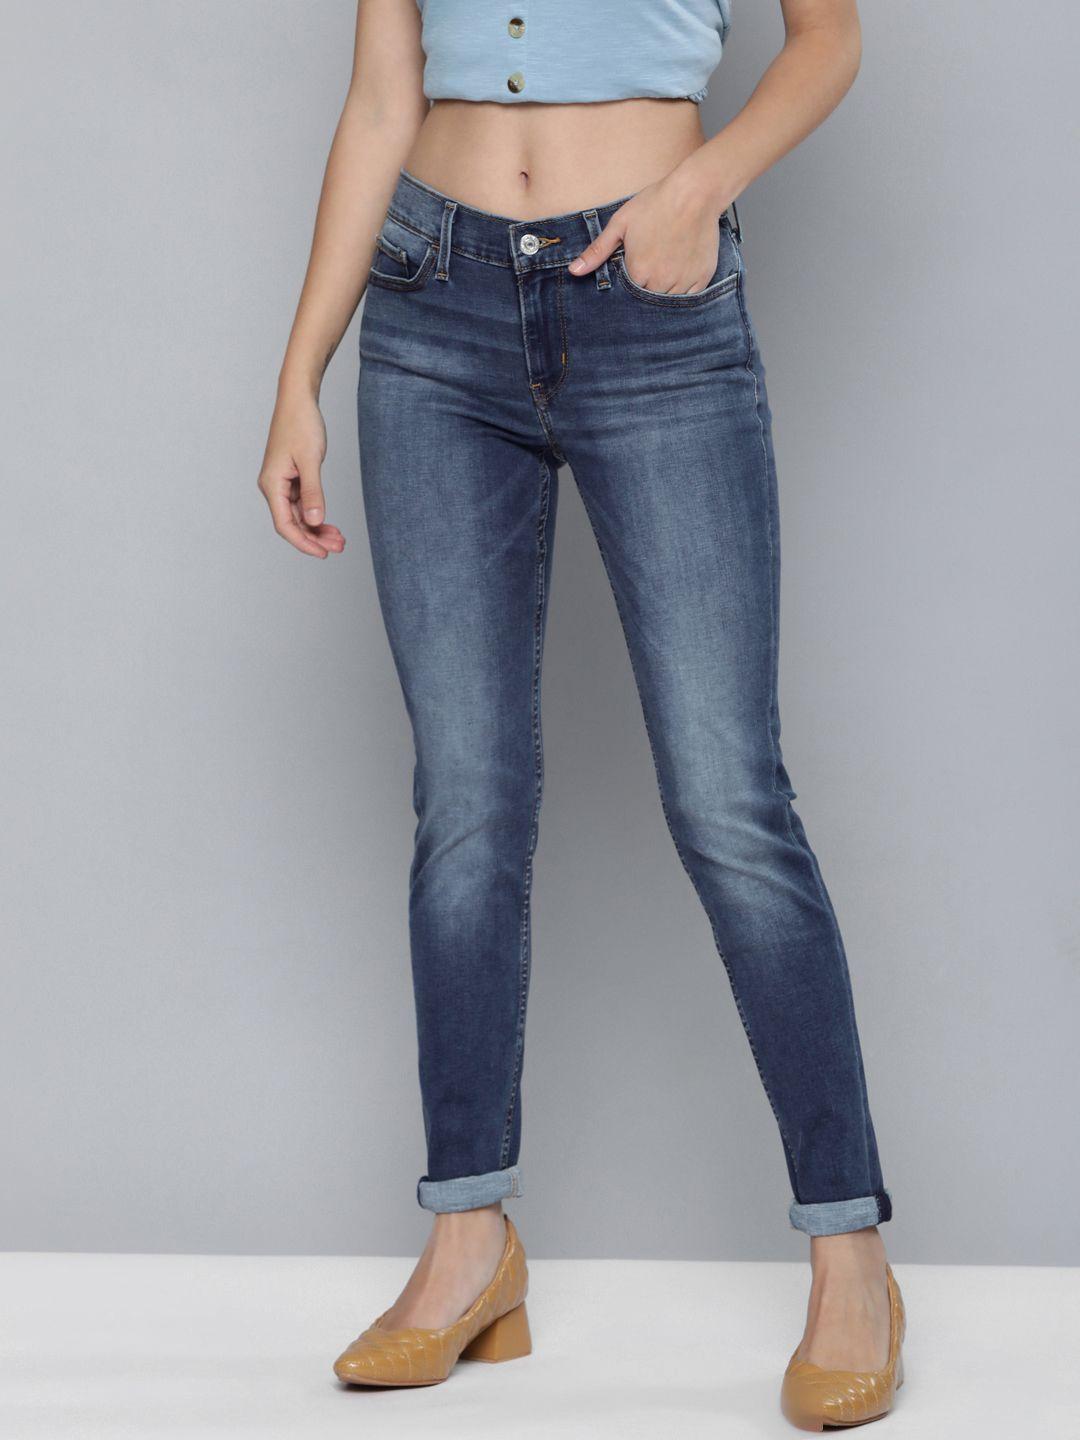 levis-women-blue-710-super-skinny-fit-mid-rise-light-fade-stretchable-jeans